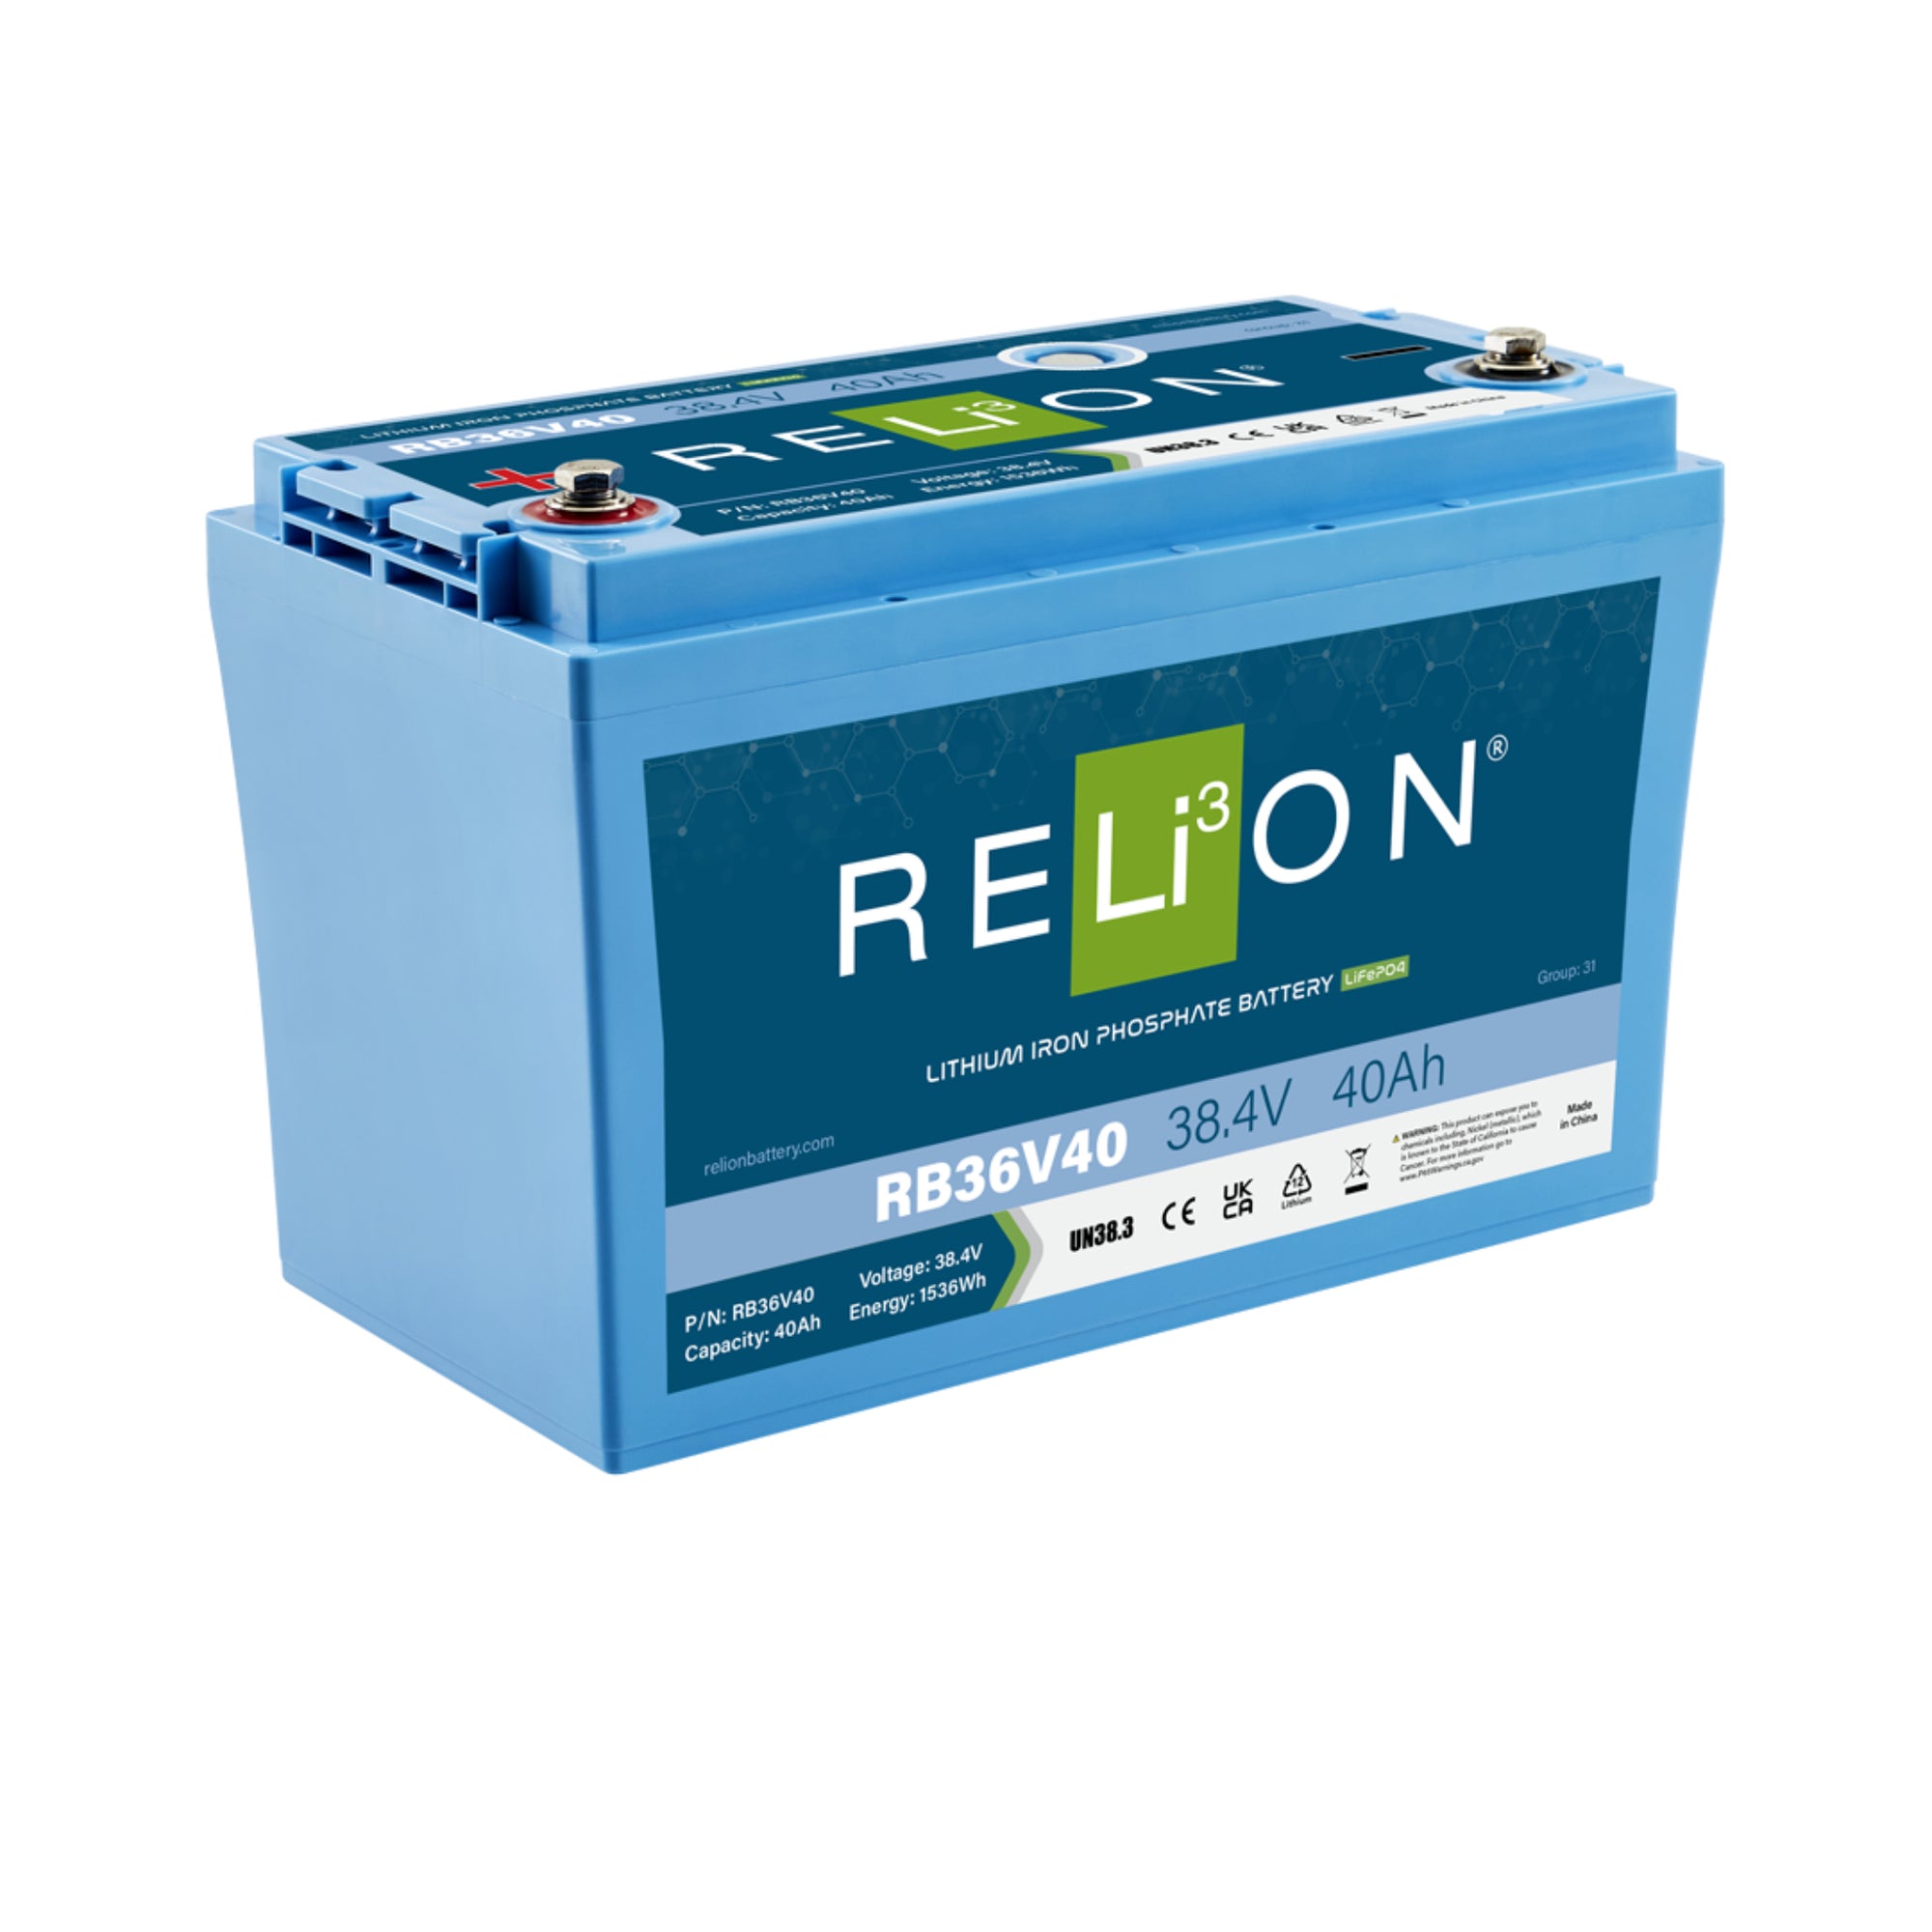 RELiON | RB36V40 Lithium Deep Cycle Battery | 36V 40Ah | Group 31